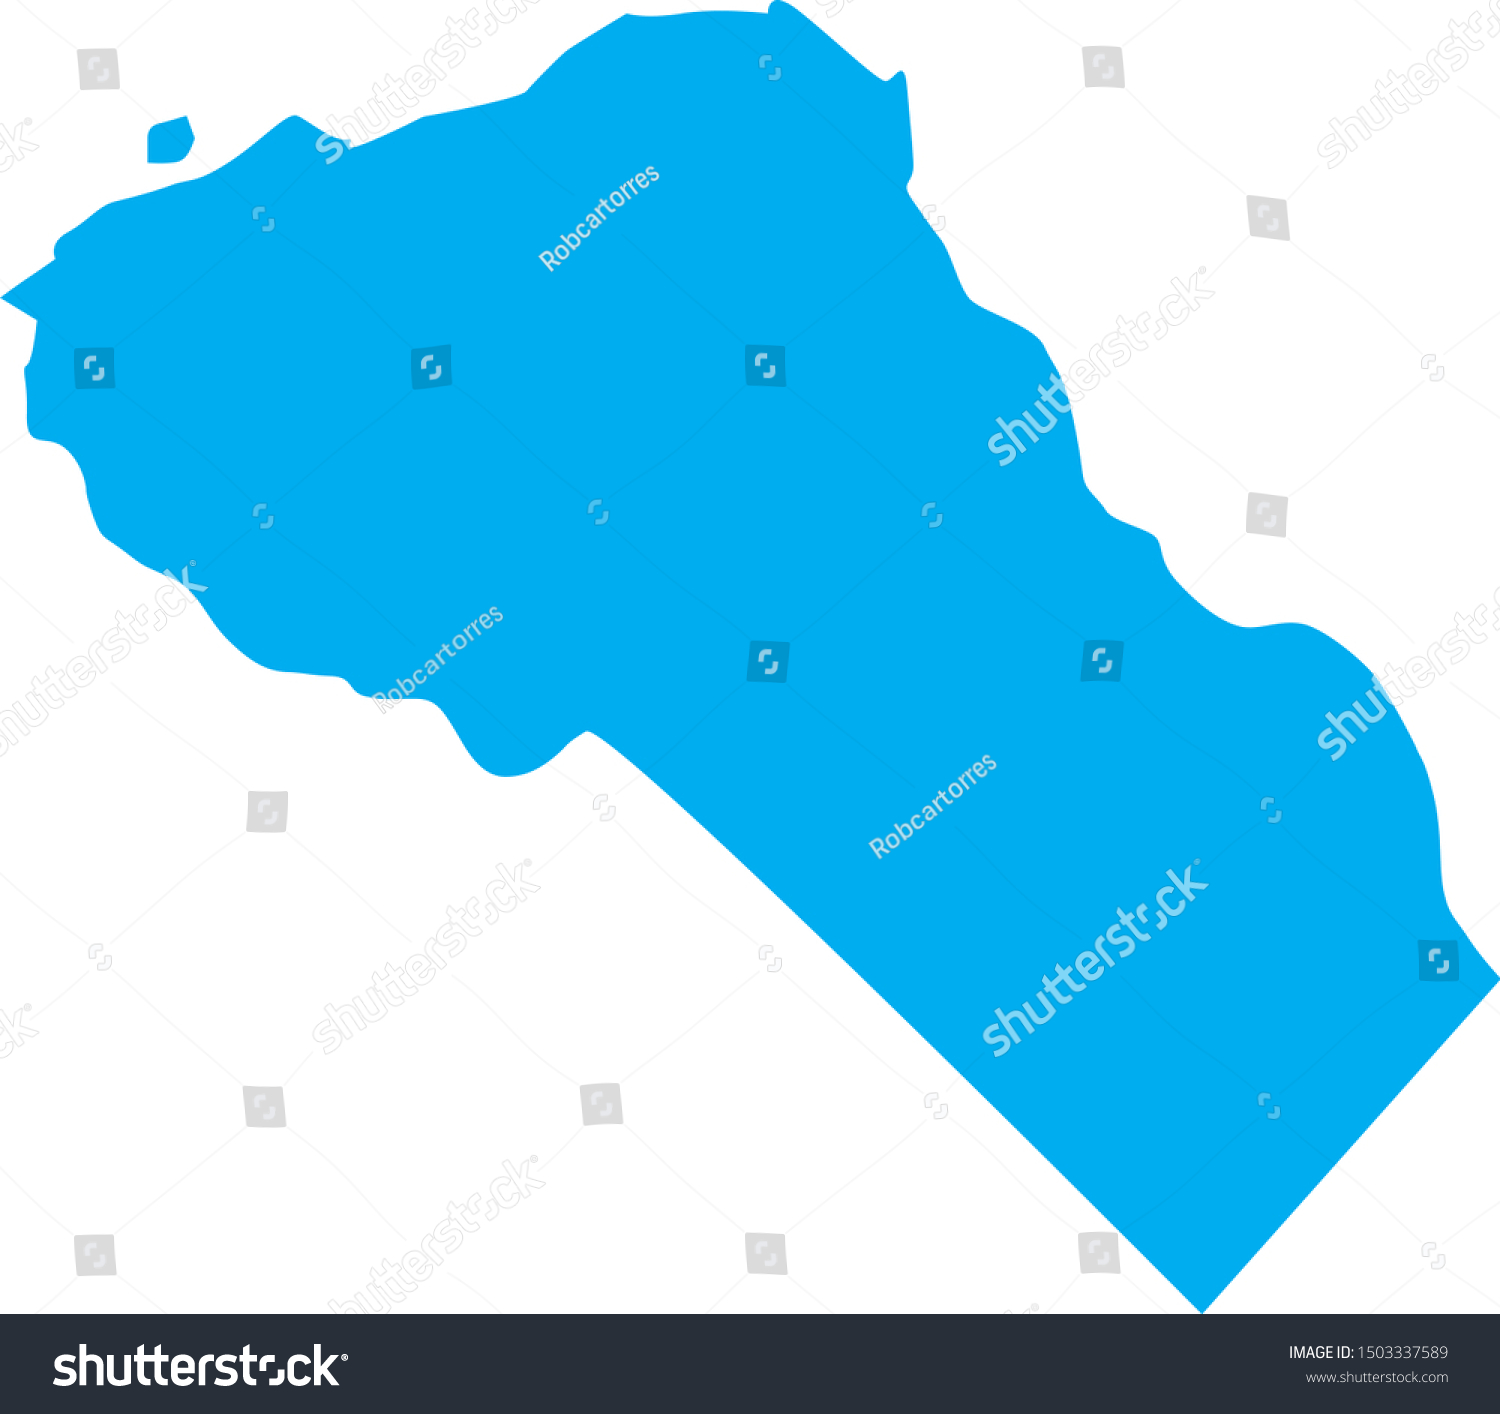 gloucester county map in state of new jersey - Royalty Free Stock ...